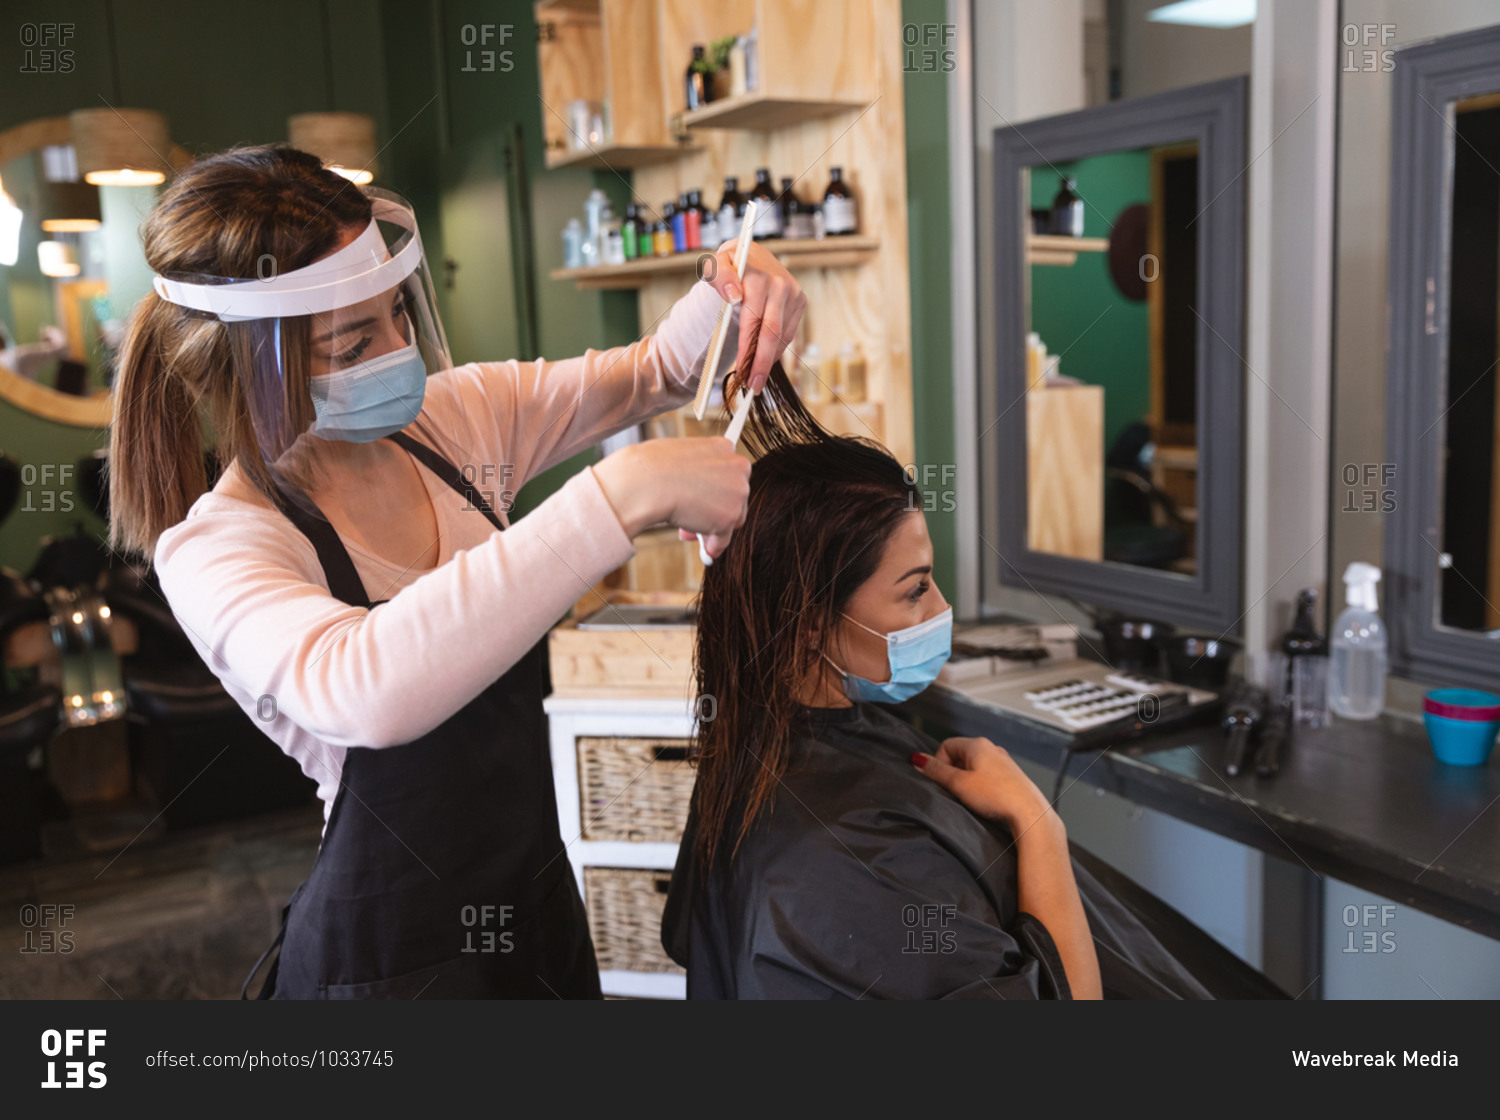 Caucasian female hairdresser working in hair salon wearing face mask, combing hair of female Caucasian customer in face mask. Health and hygiene in workplace during Coronavirus Covid 19 pandemic.